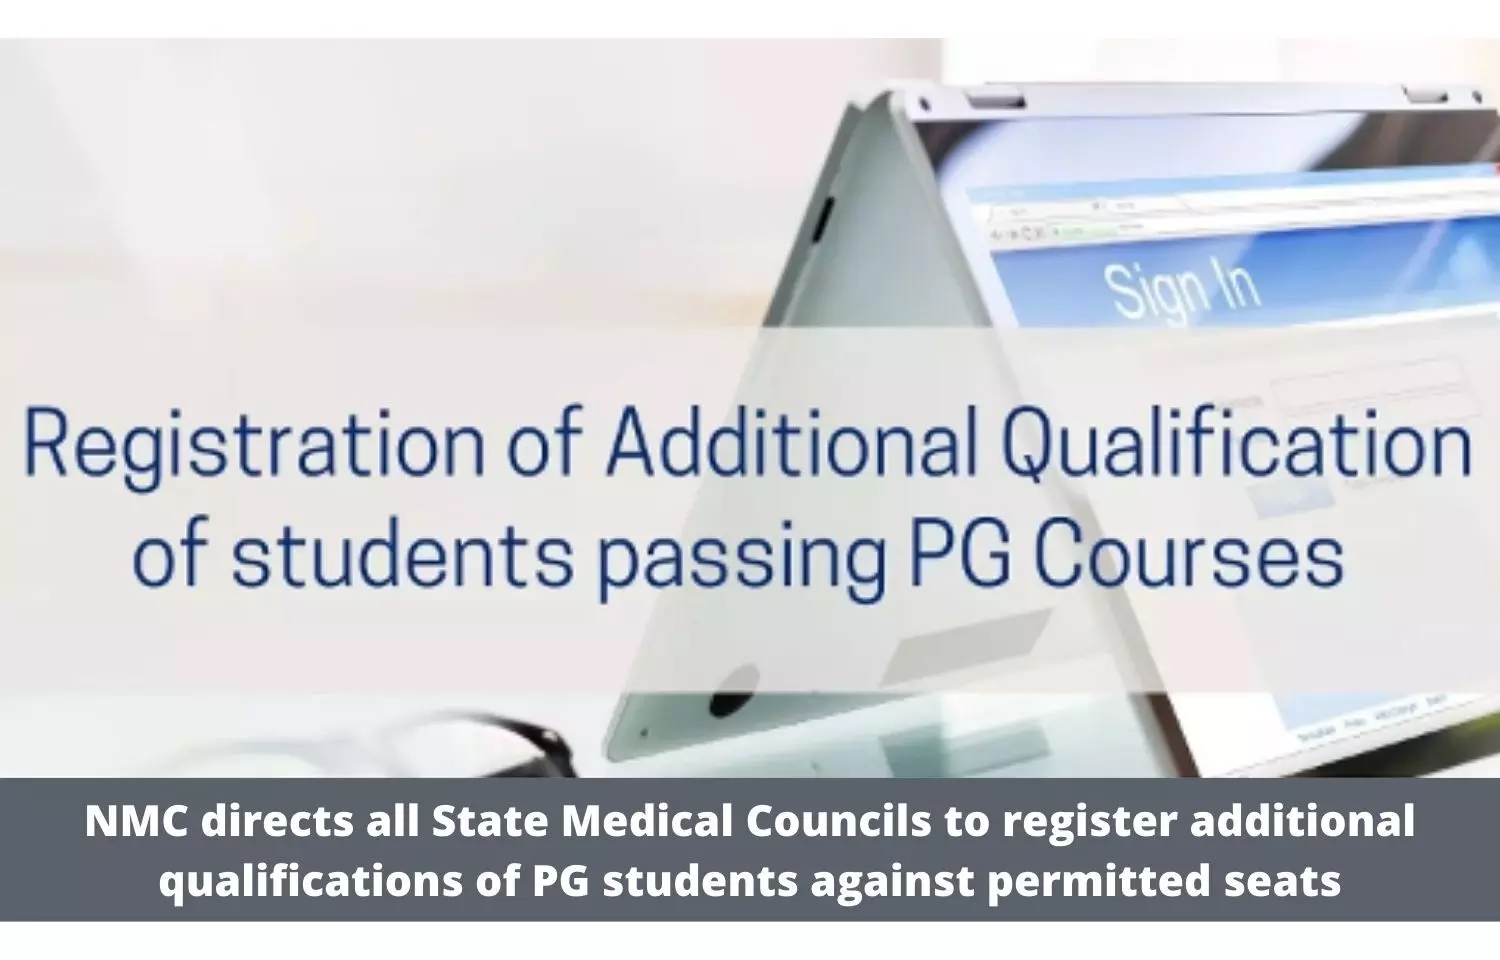 NMC directs all state medical councils to register additional qualifications of PG students against permitted seats